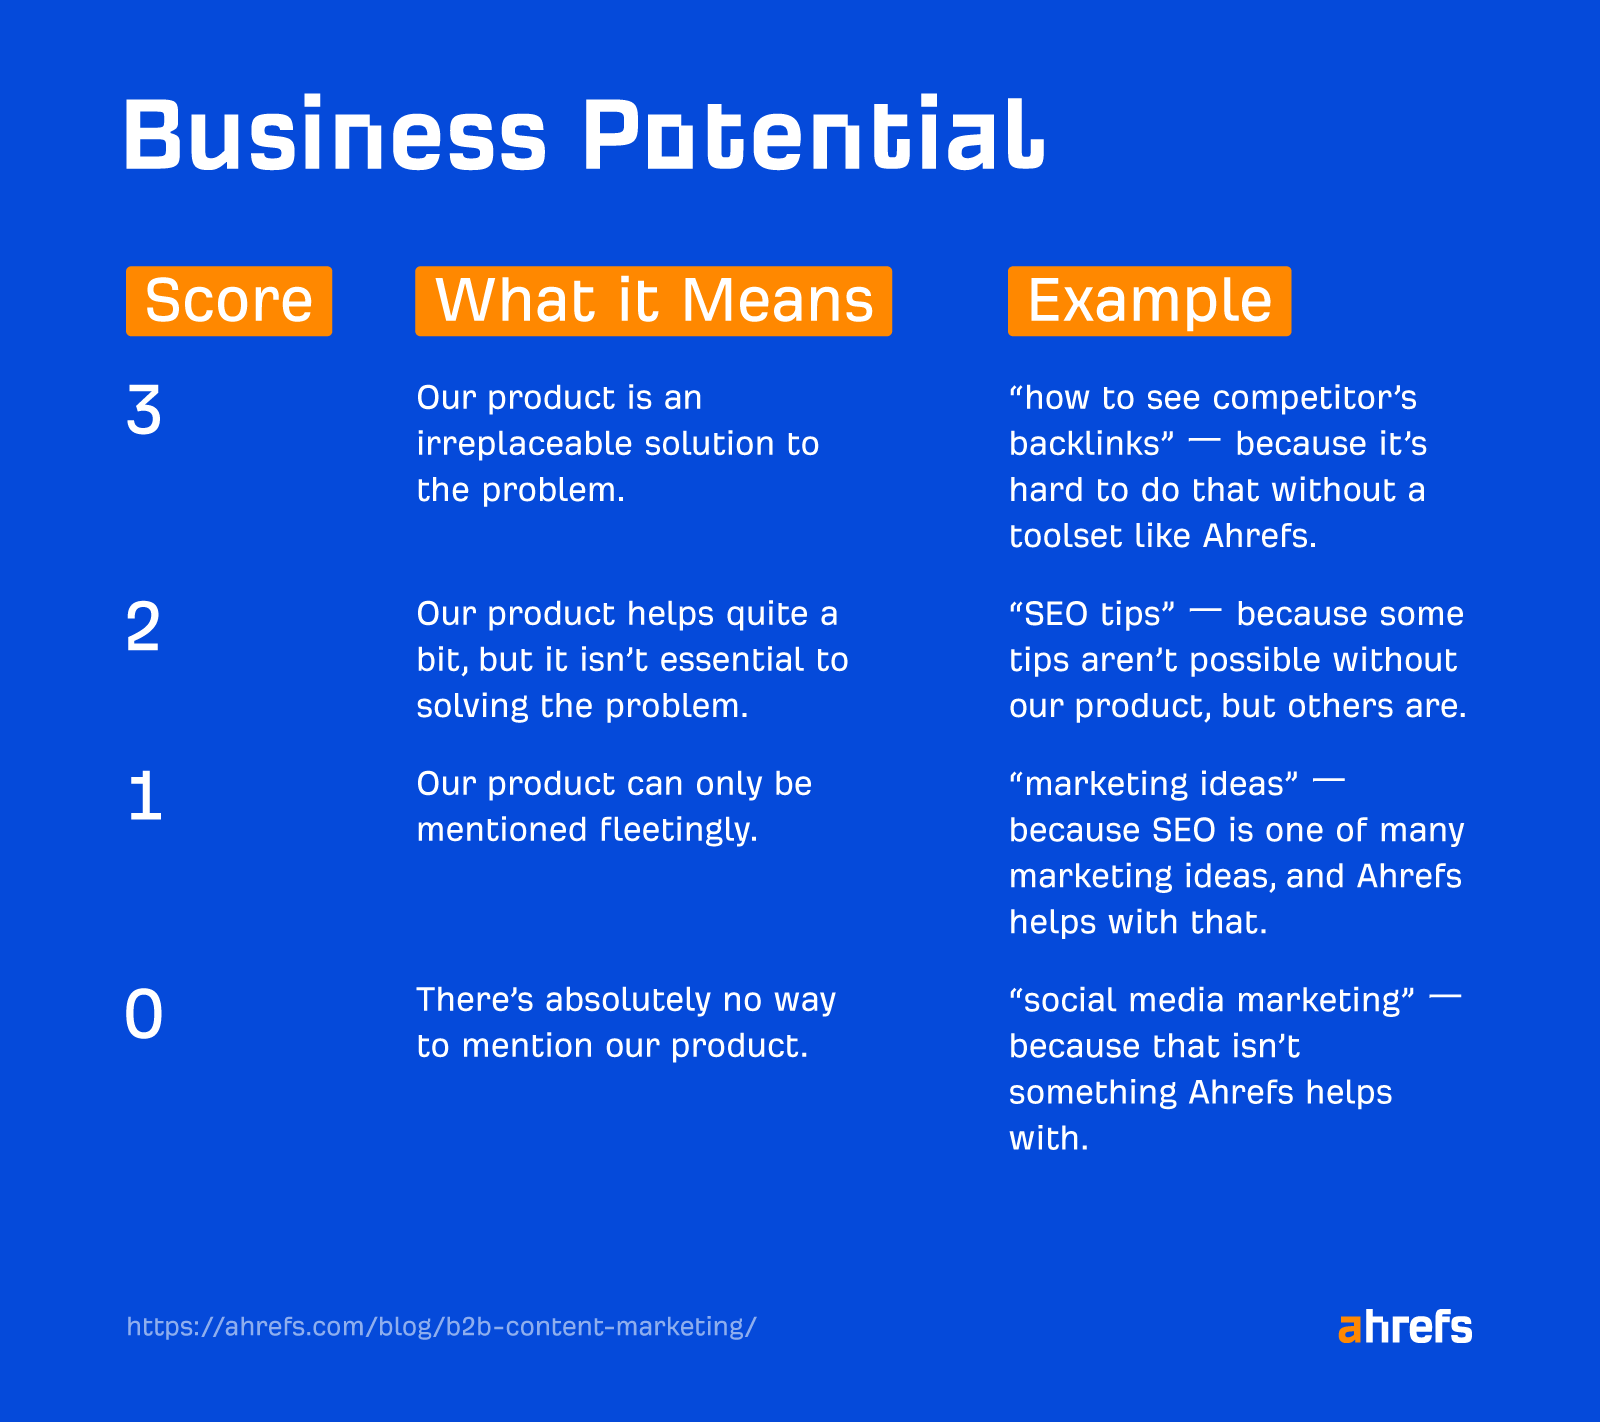 How to score a topic's business potential